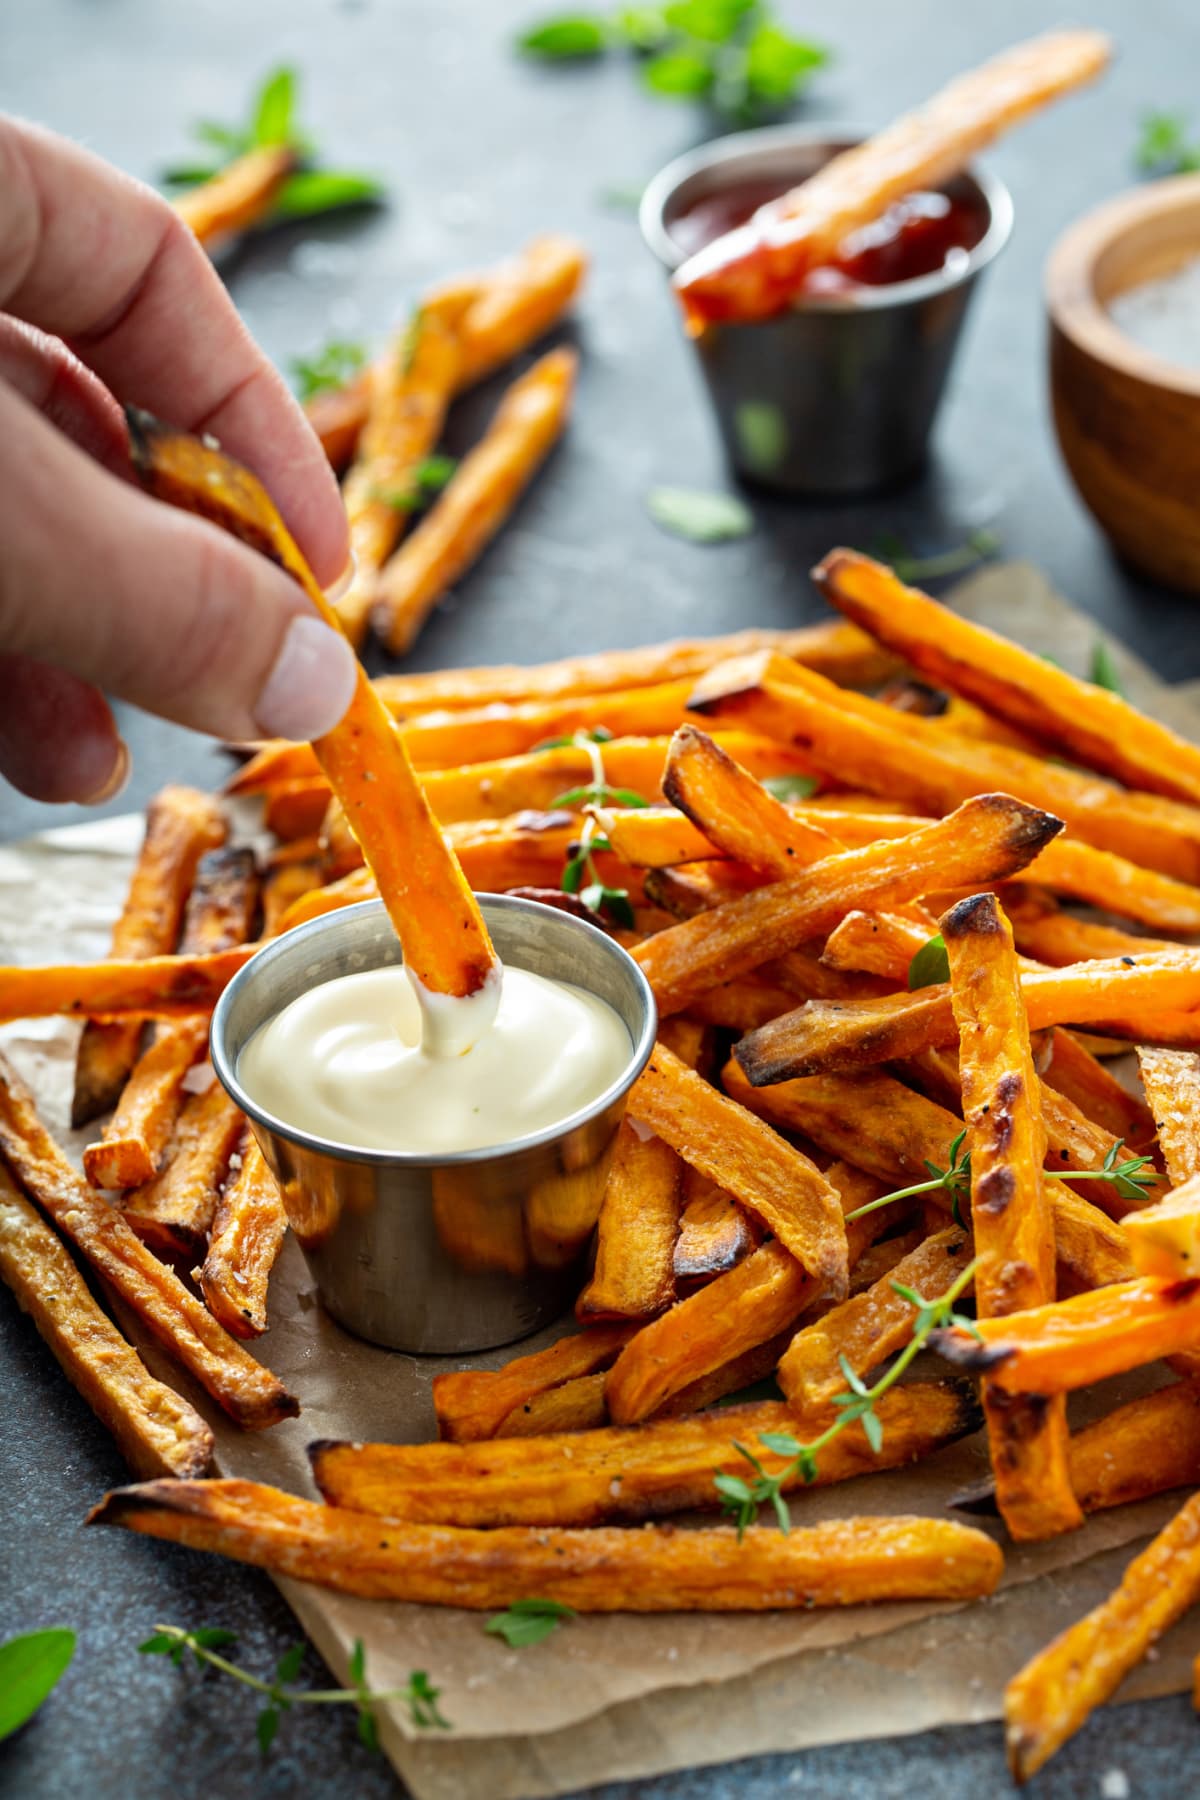 Sweet potato fries with mayo and ketchup, homemade roasted in the oven